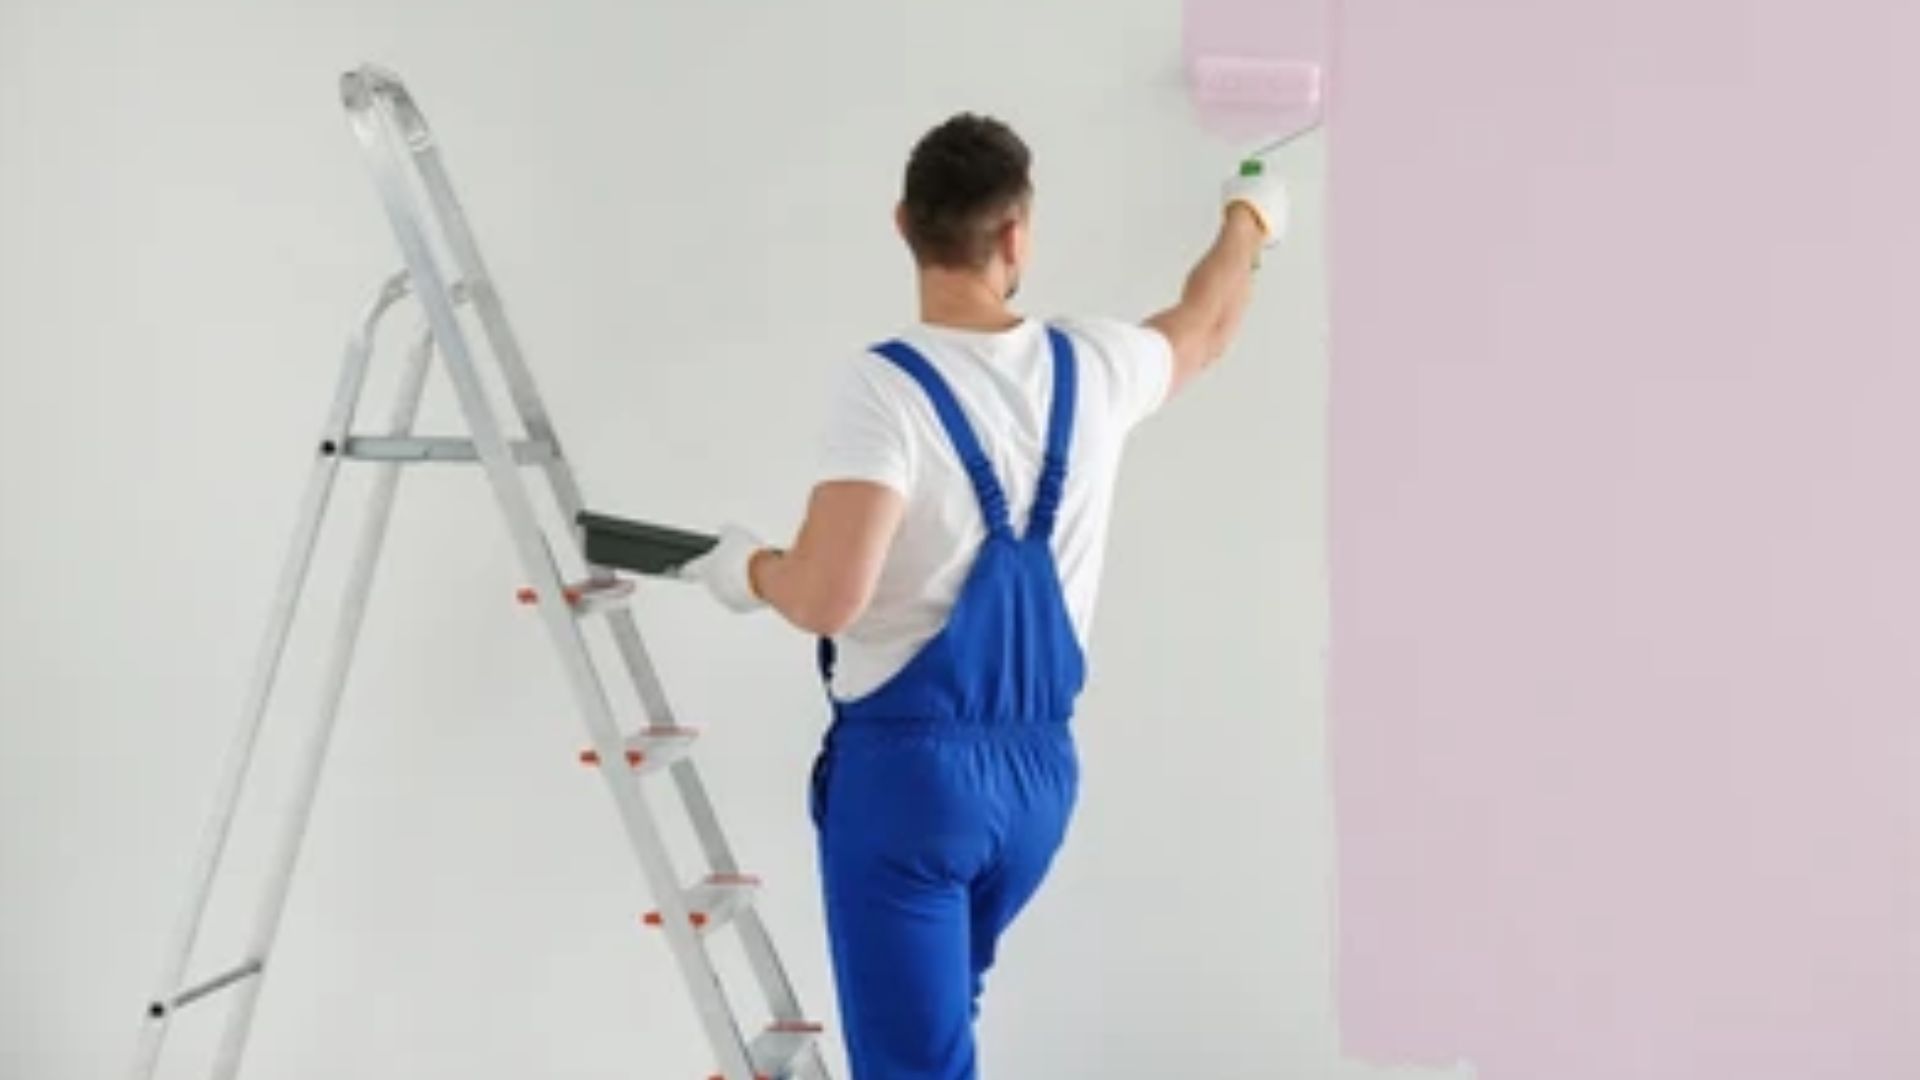 choosing the right Painting Contracting Company Dubai